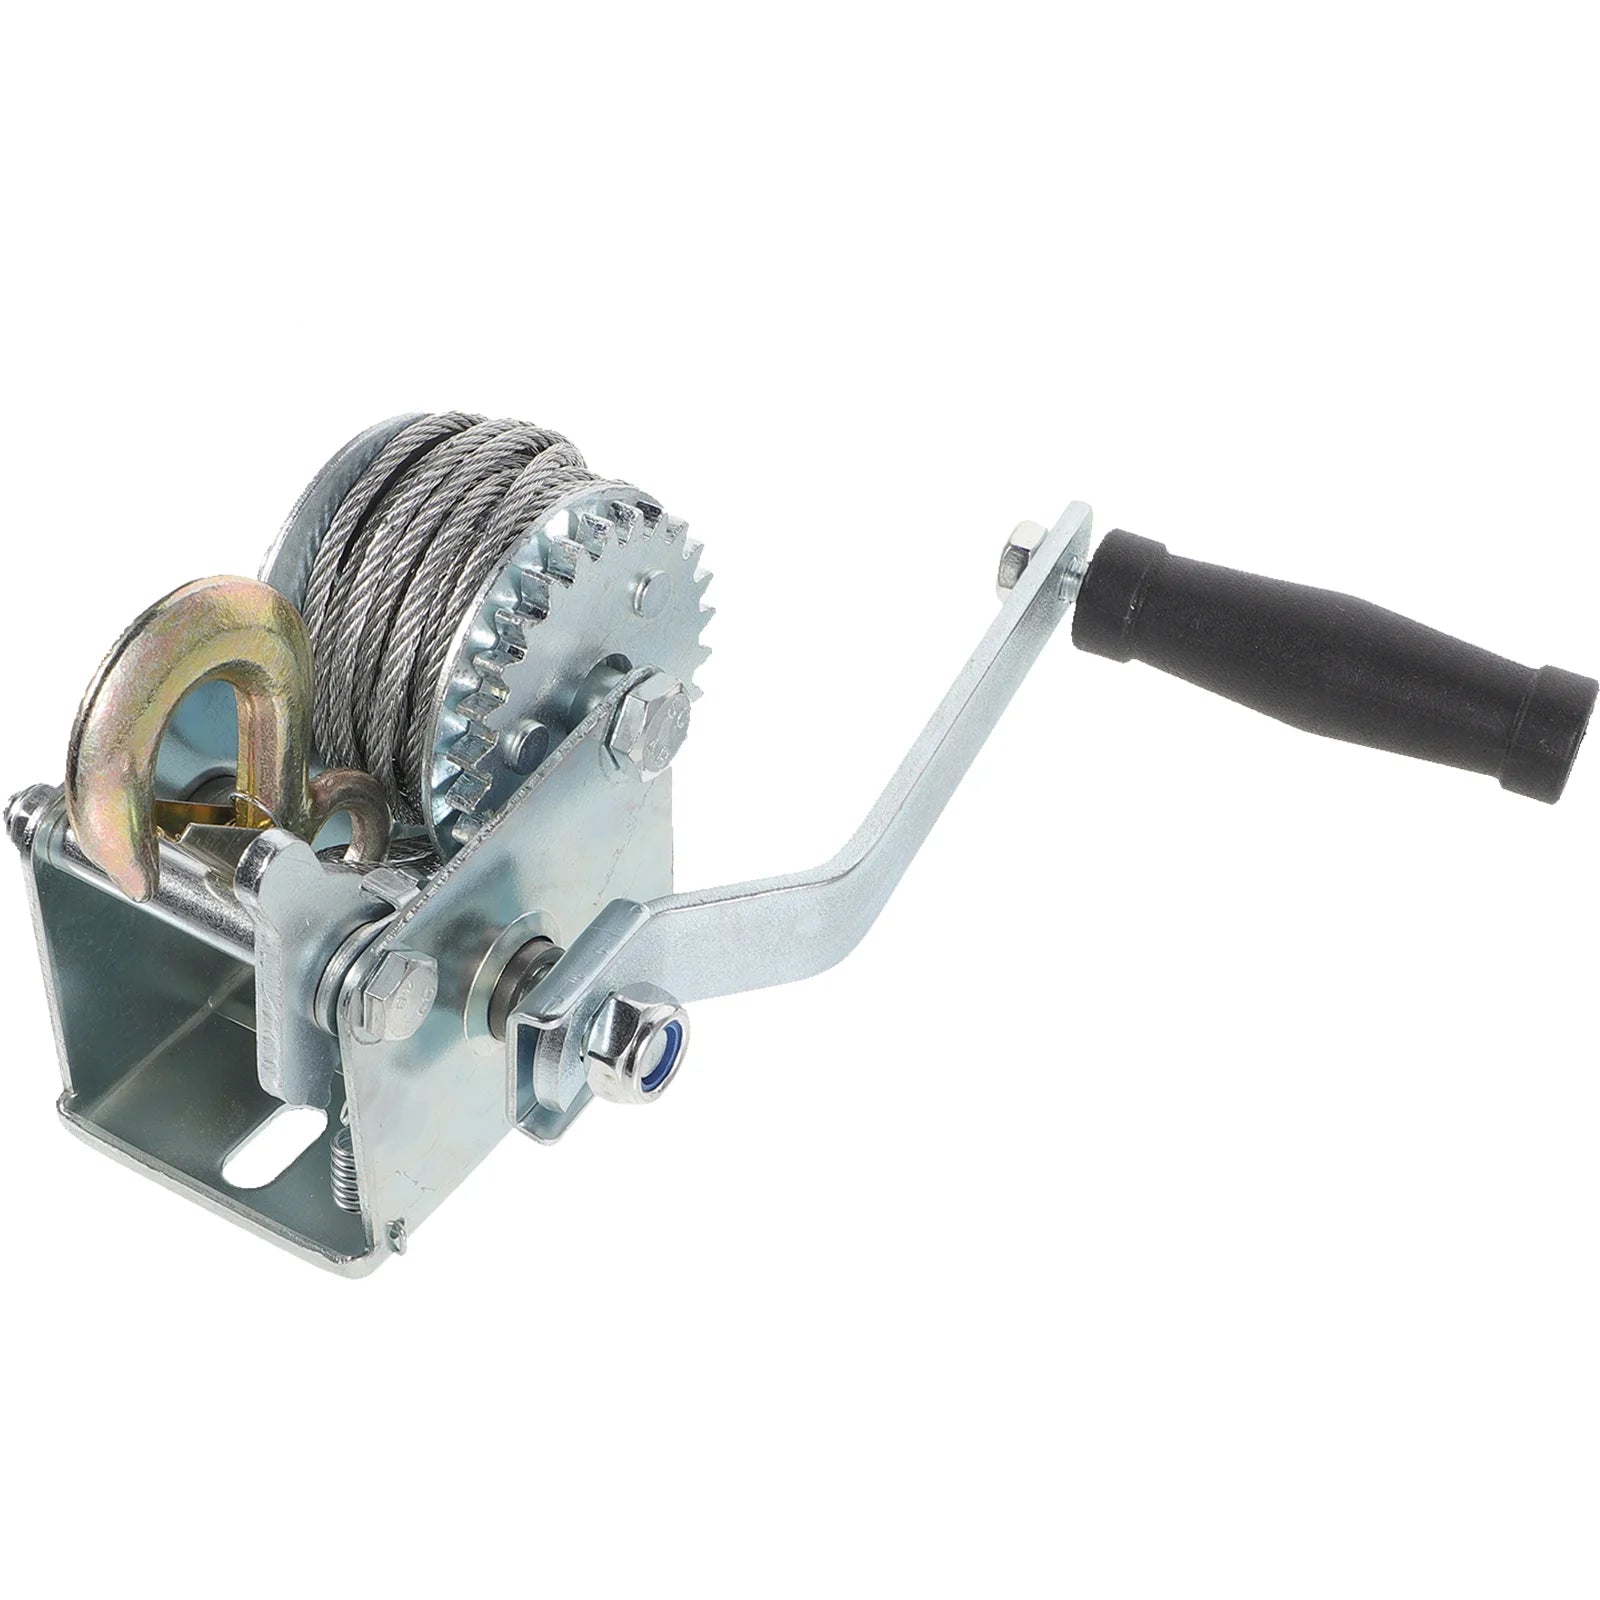 Small Trailer Hand Crank Winch 500 Lb Boat Household 500lb Ratchet Metal Towing Manual